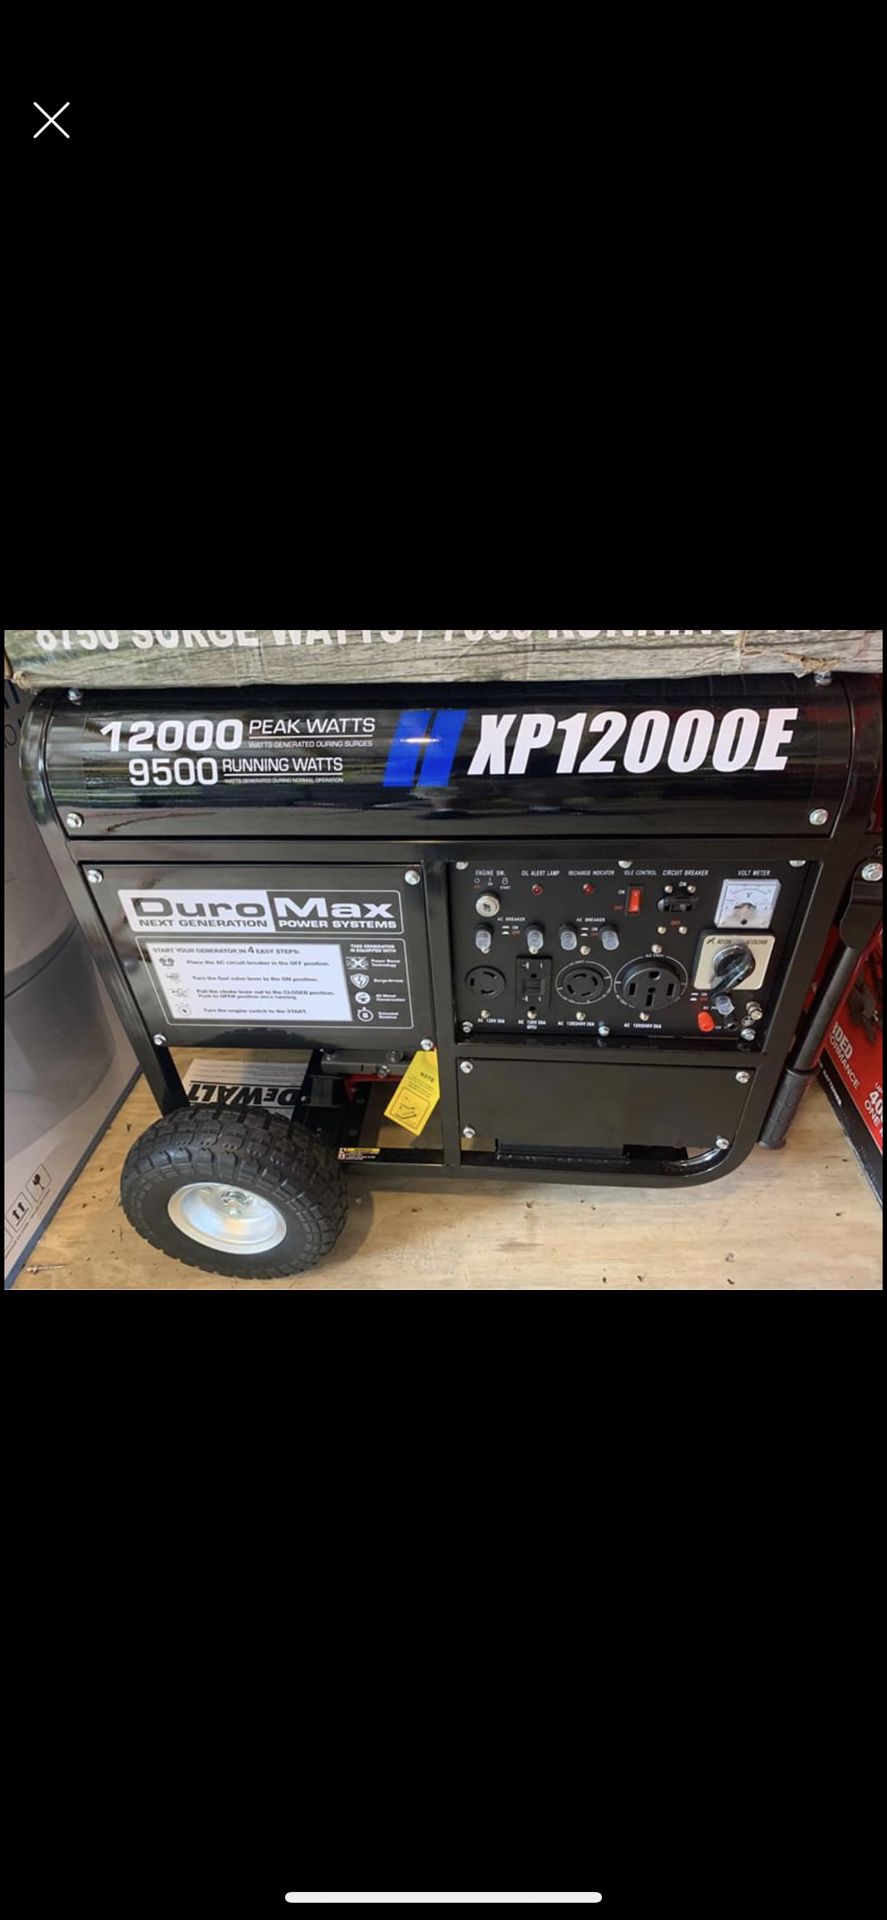 Brand new never seen gas H XP 12000E gas generator electric start for while house take advantage before its gone 850 cash firm price